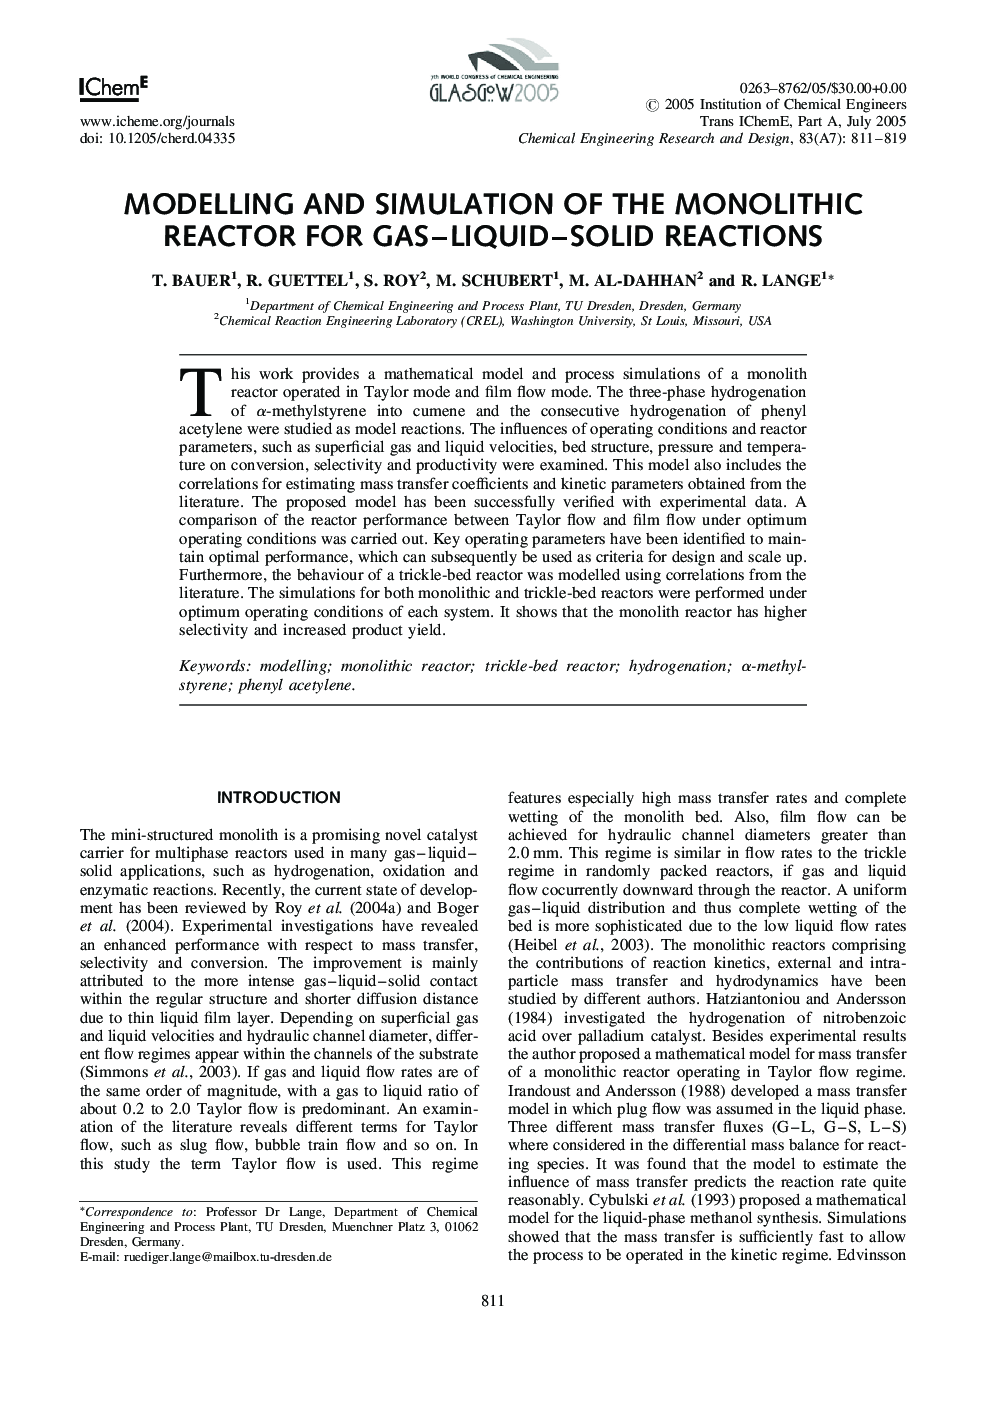 Modelling and Simulation of the Monolithic Reactor for Gas-Liquid-Solid Reactions